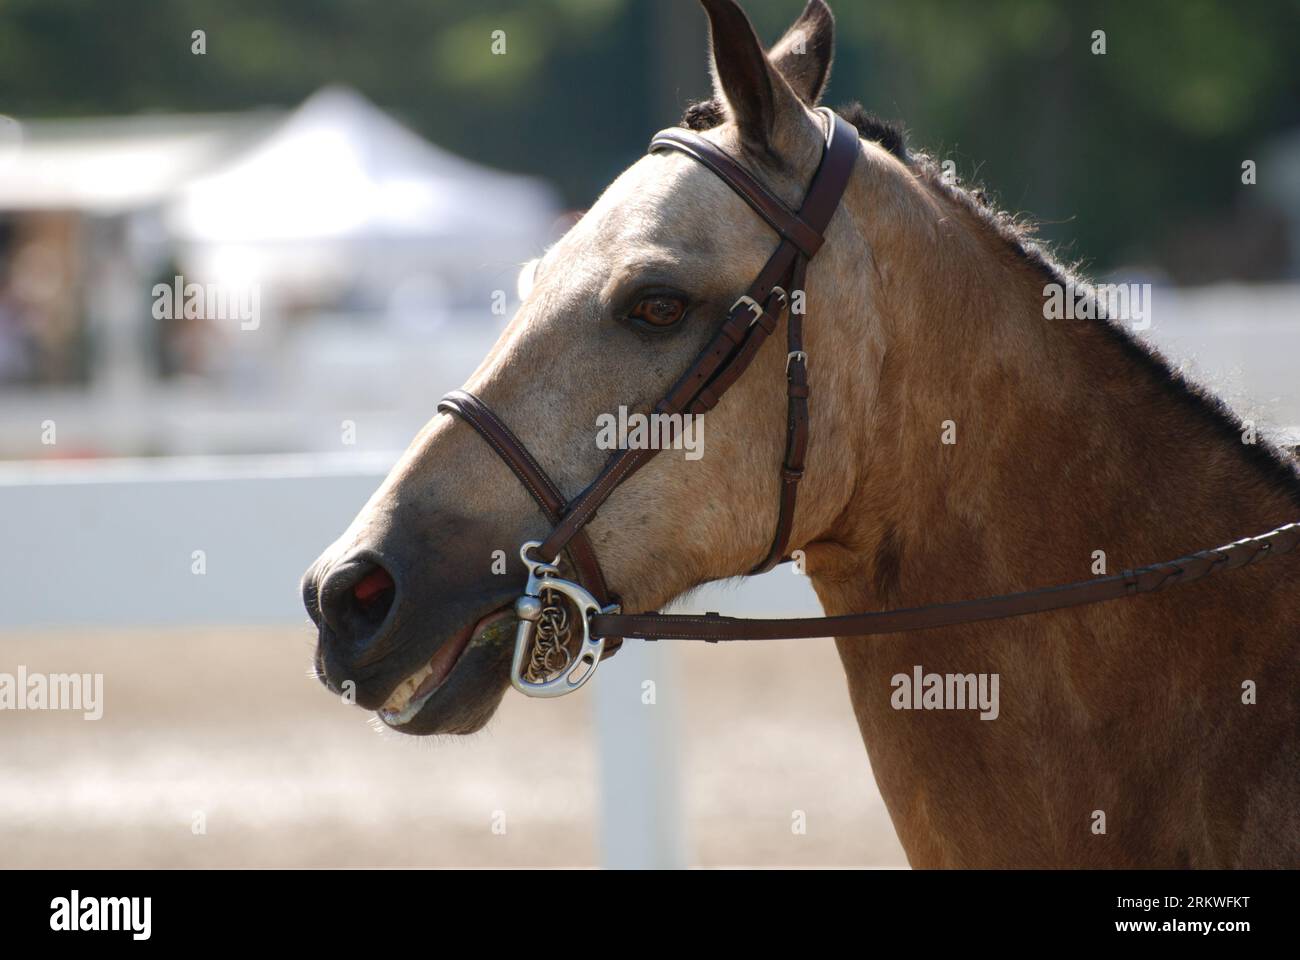 Beautiful roan pony braided and ready at a hunter horse show. Stock Photo